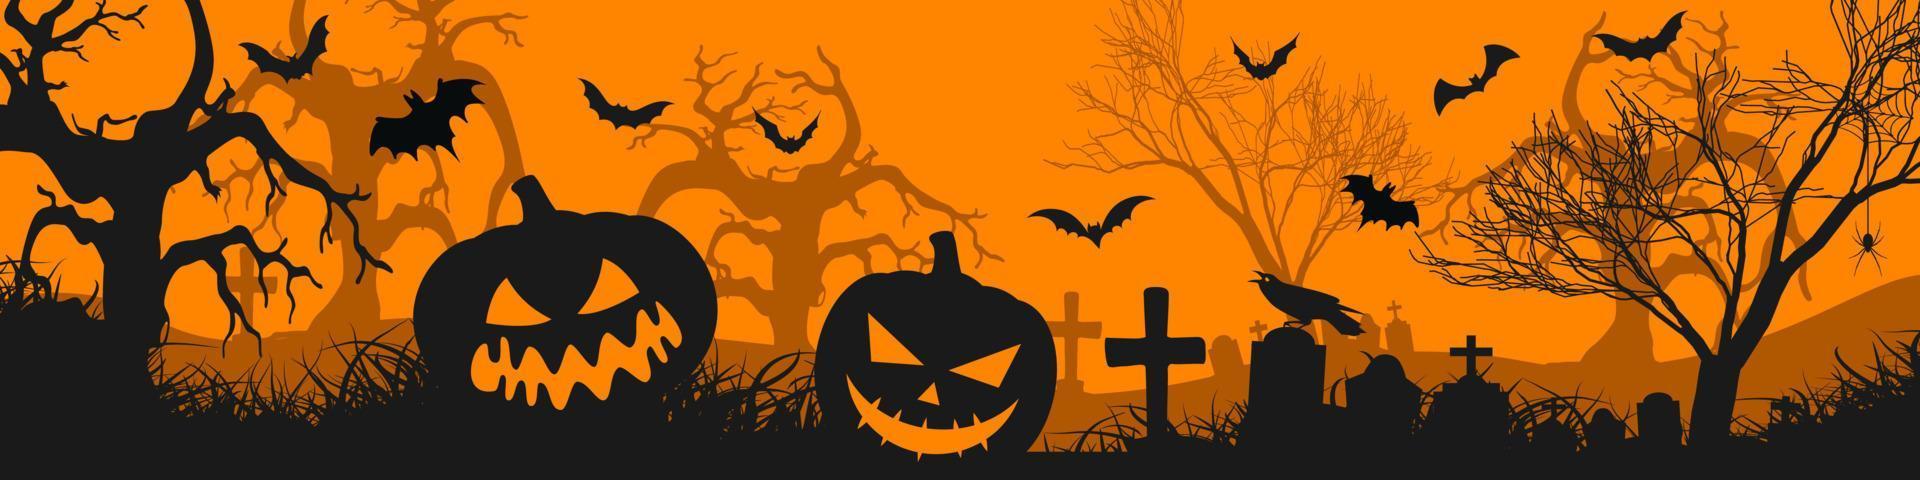 Halloween night background with silhouettes of halloween pumpkins cemetery and scary bats. vector